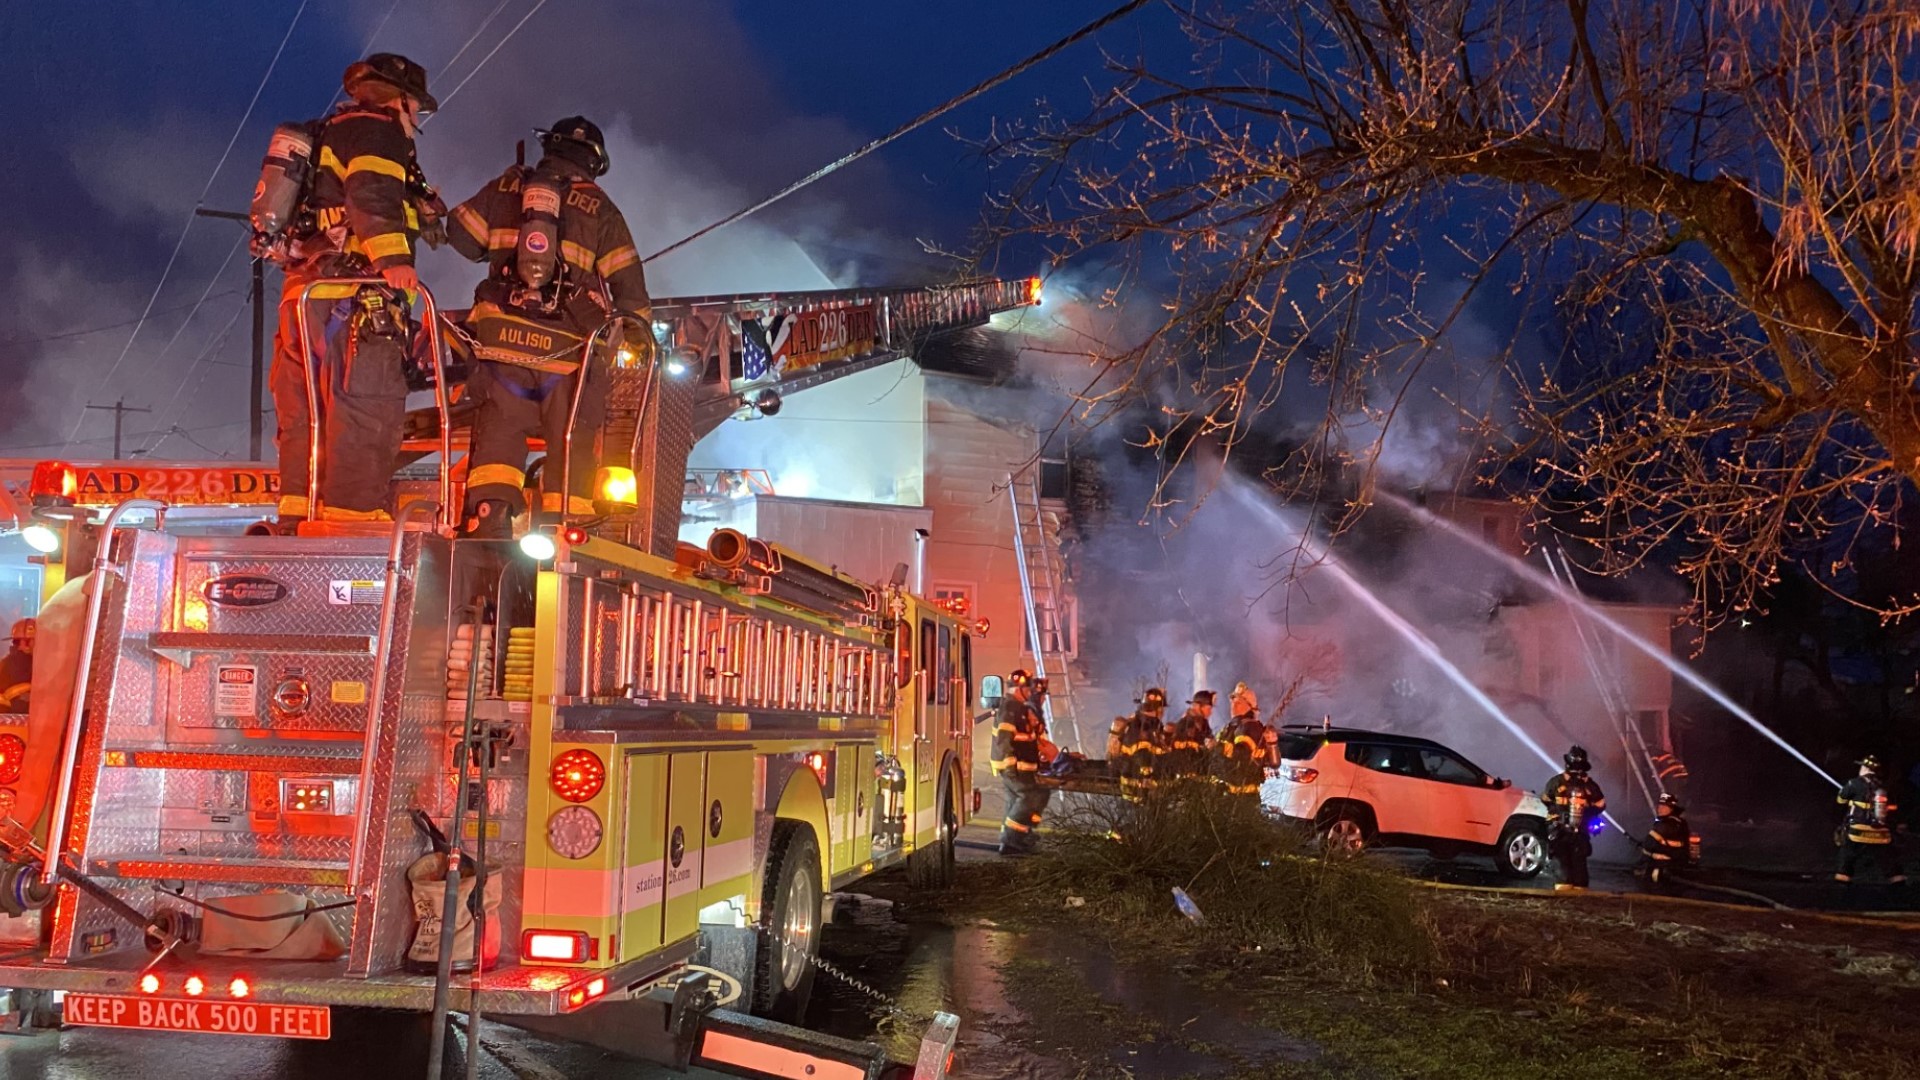 Crews were called to a home along Foote Avenue in Duryea around 6 a.m. Saturday to fight a fire. It was the second fire there in two weeks.